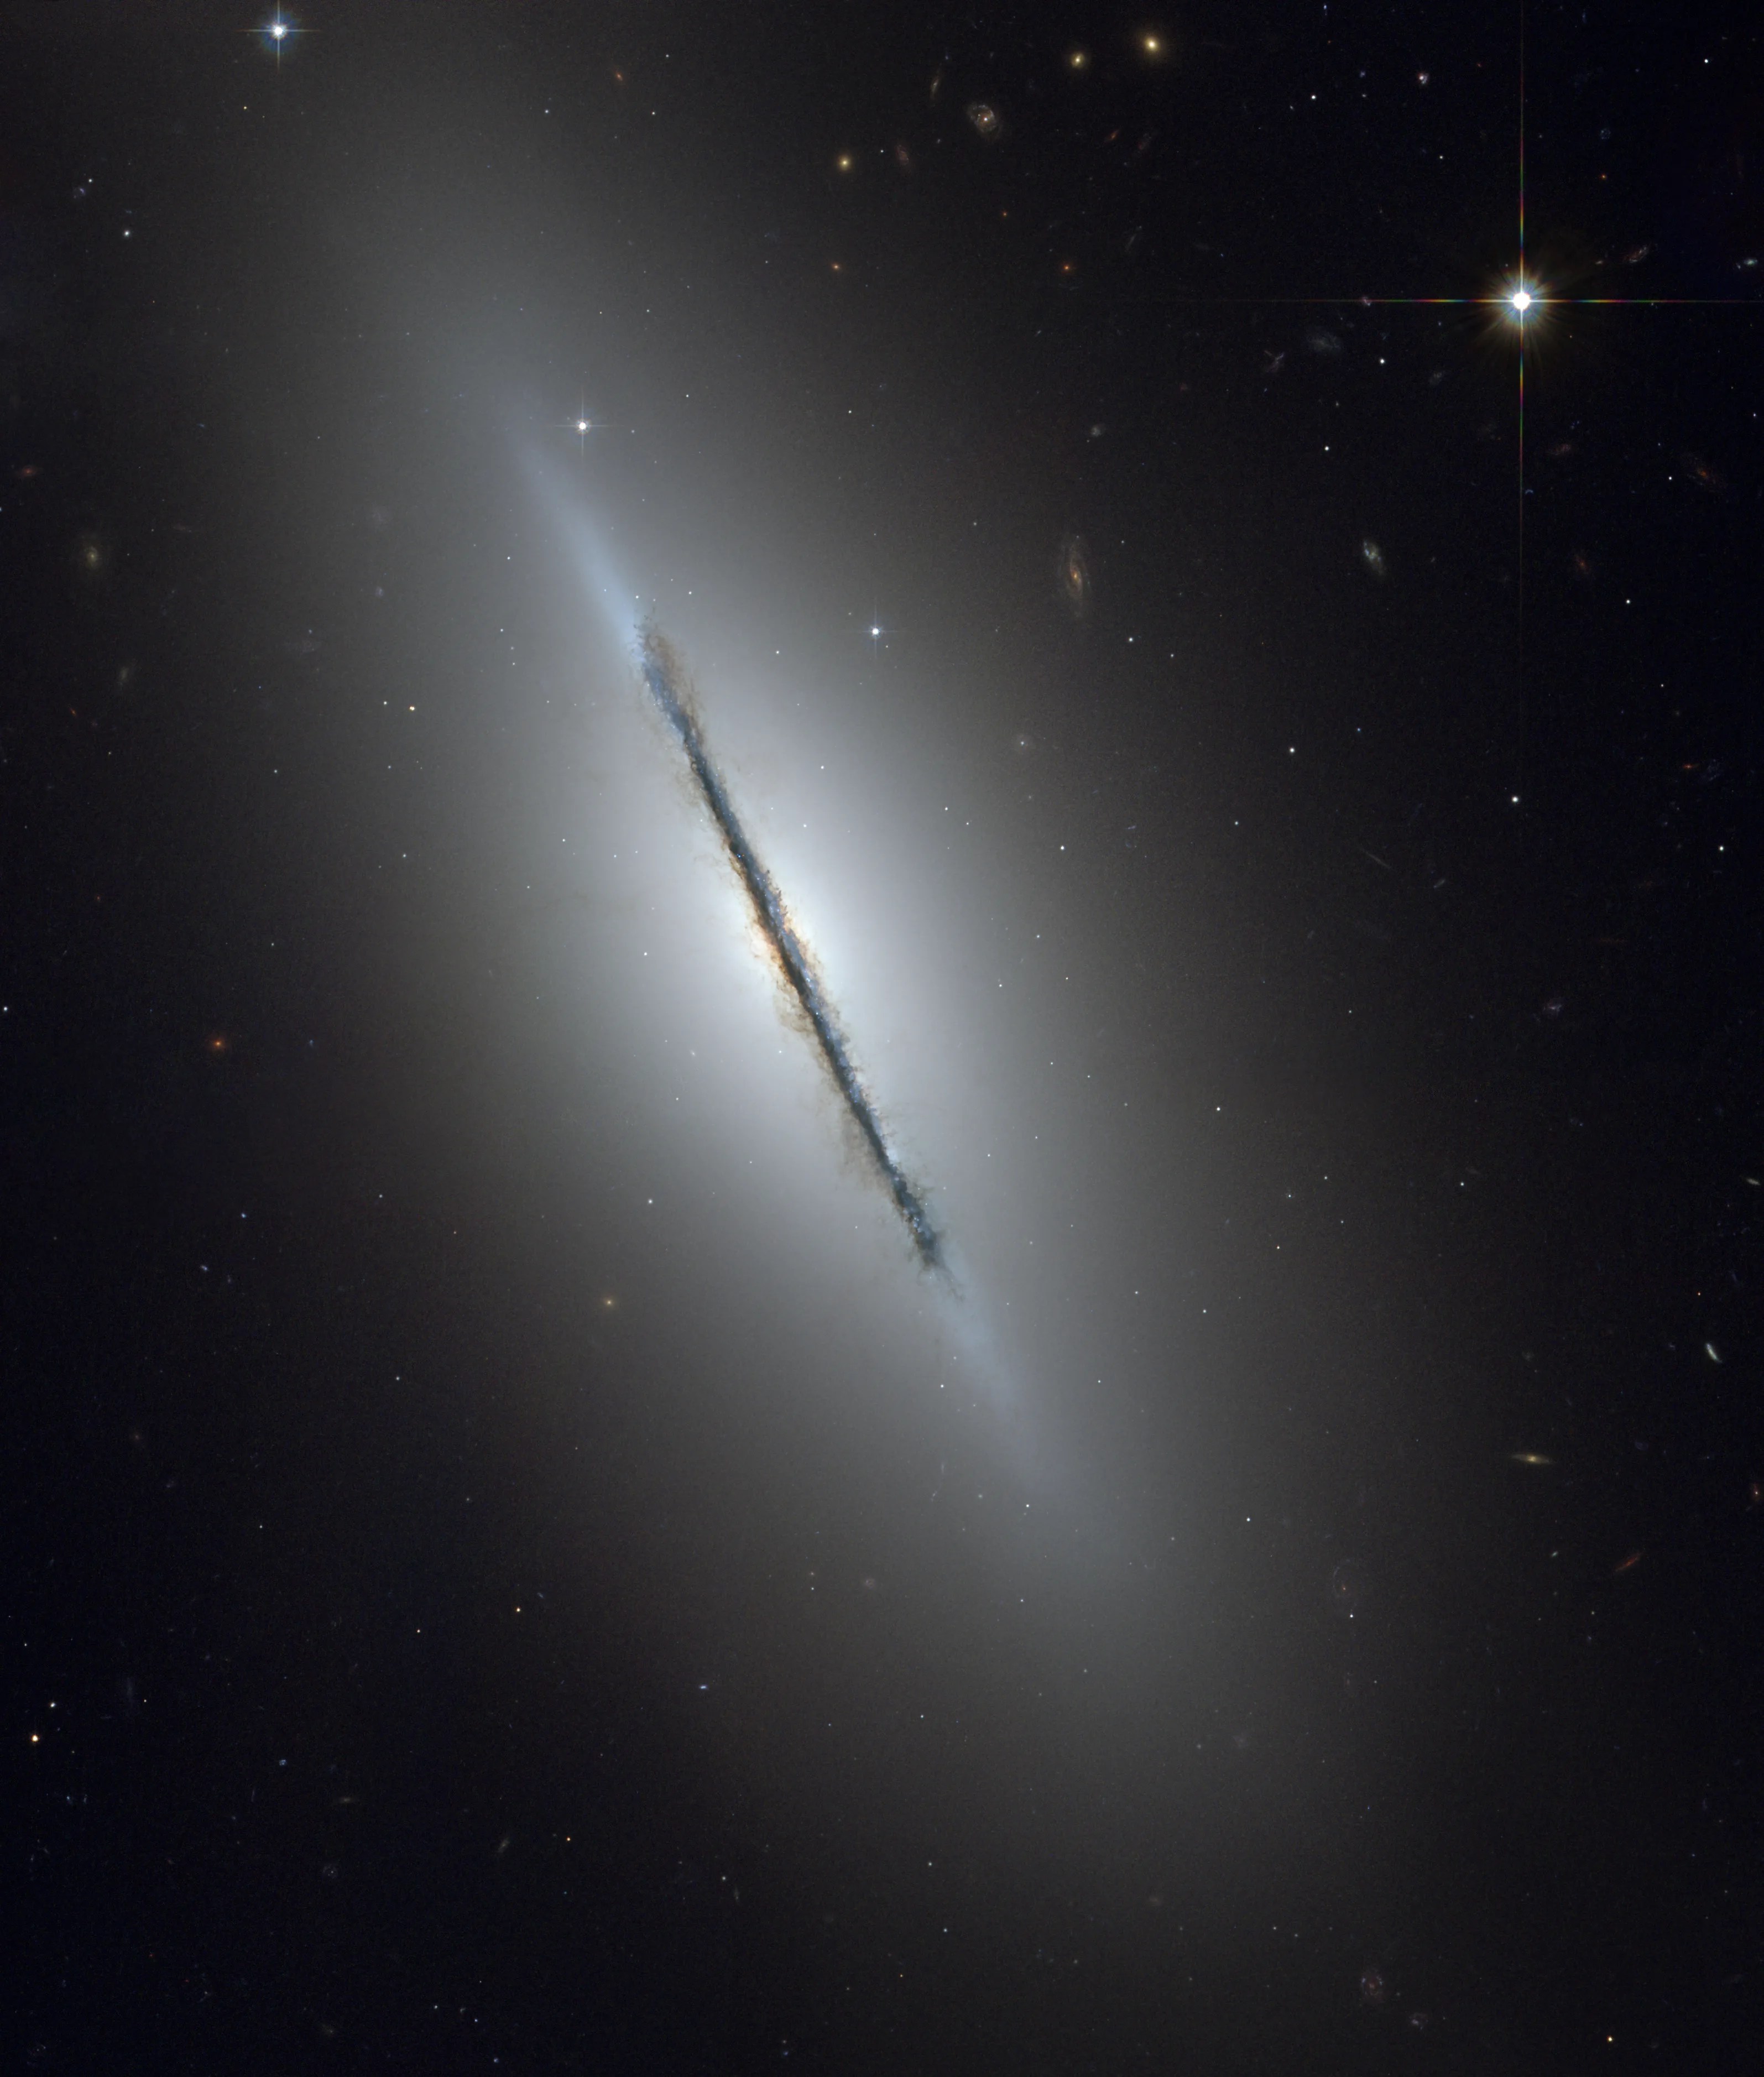 A galaxy is seen edge-on, with a dark lane of dust obscuring it surrounded by a hazy white glow, all against a black background.